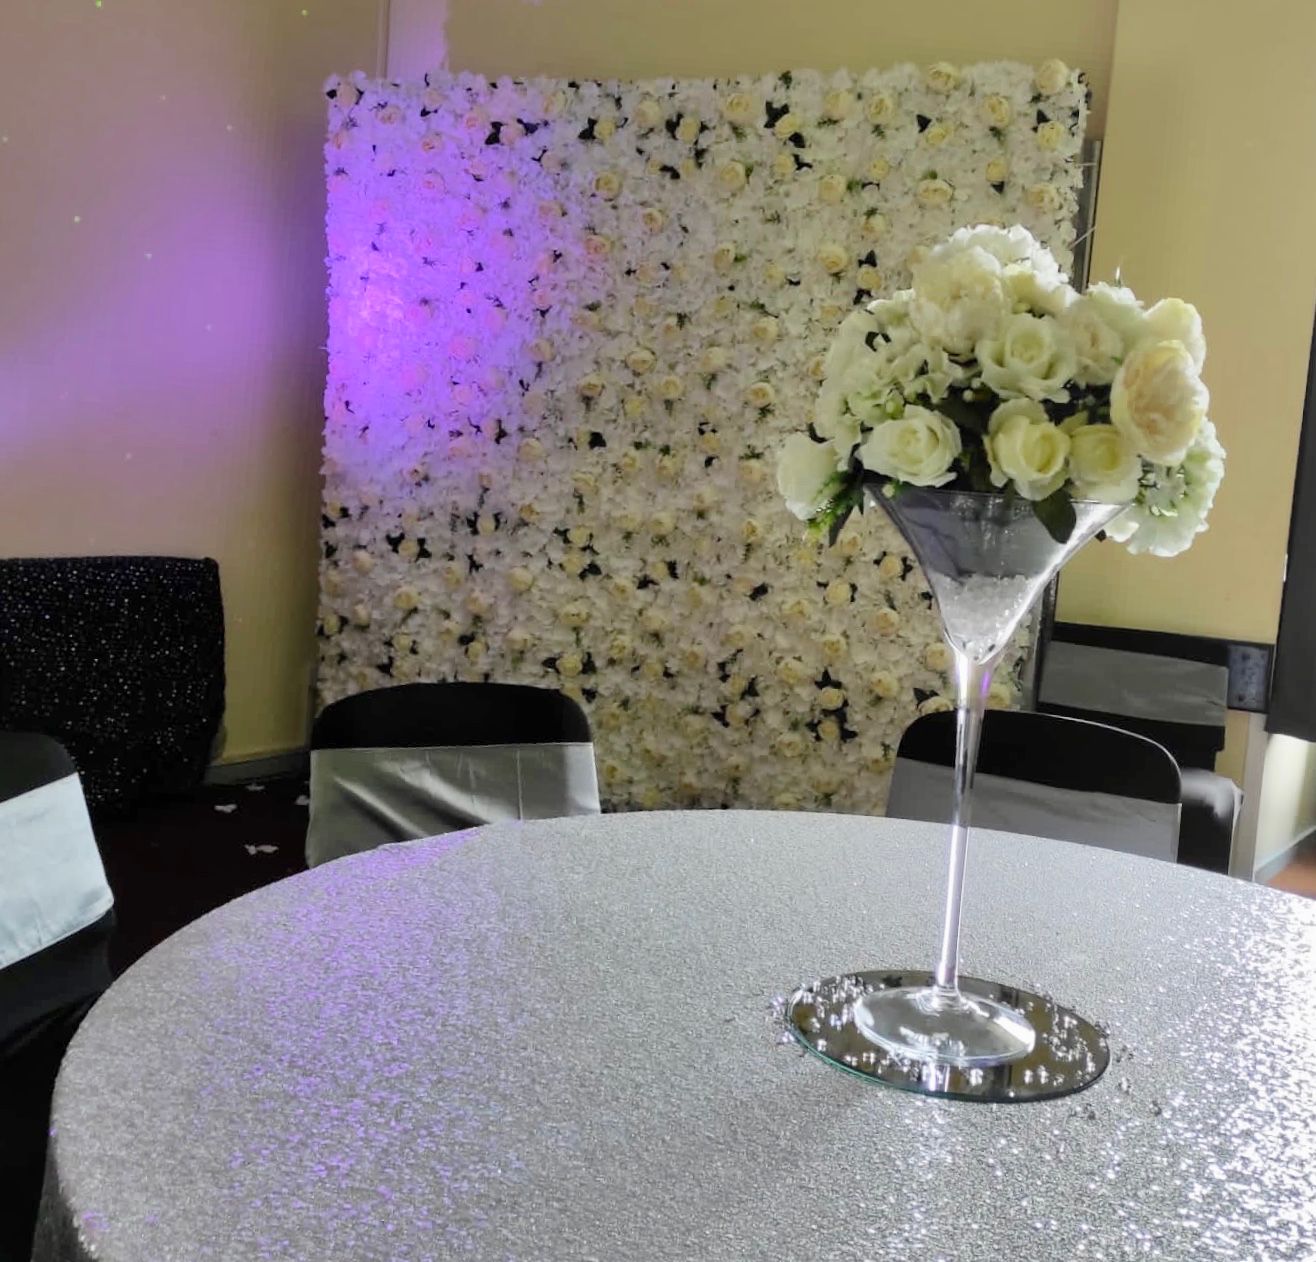 Lovely white flower wall in the background, with a white centrepiece in the foreground.